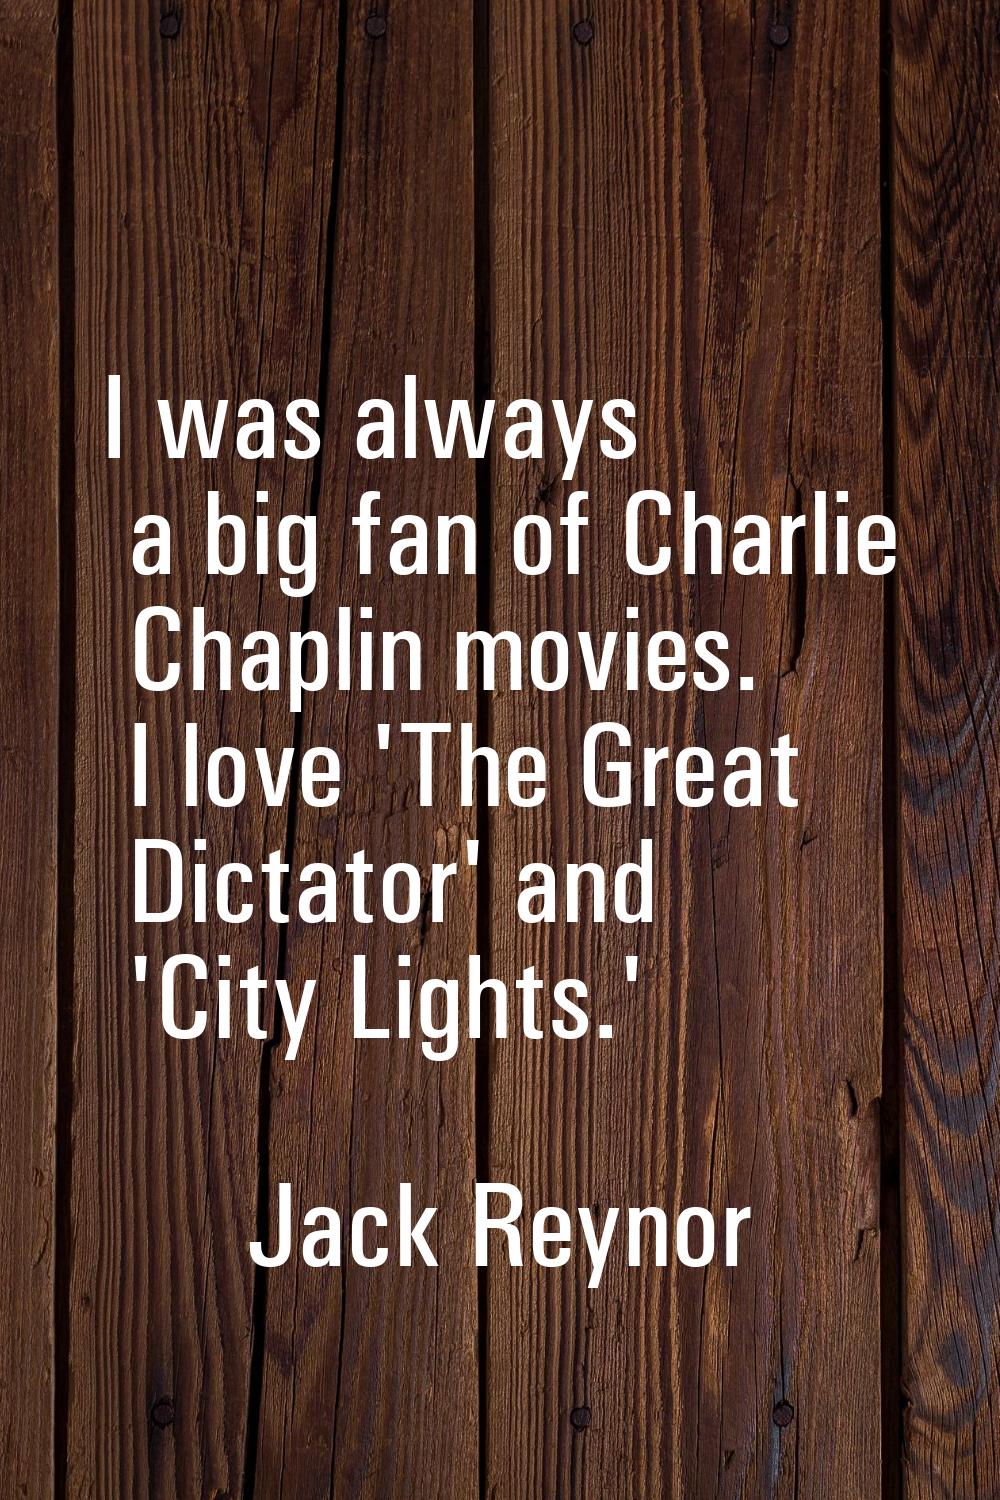 I was always a big fan of Charlie Chaplin movies. I love 'The Great Dictator' and 'City Lights.'